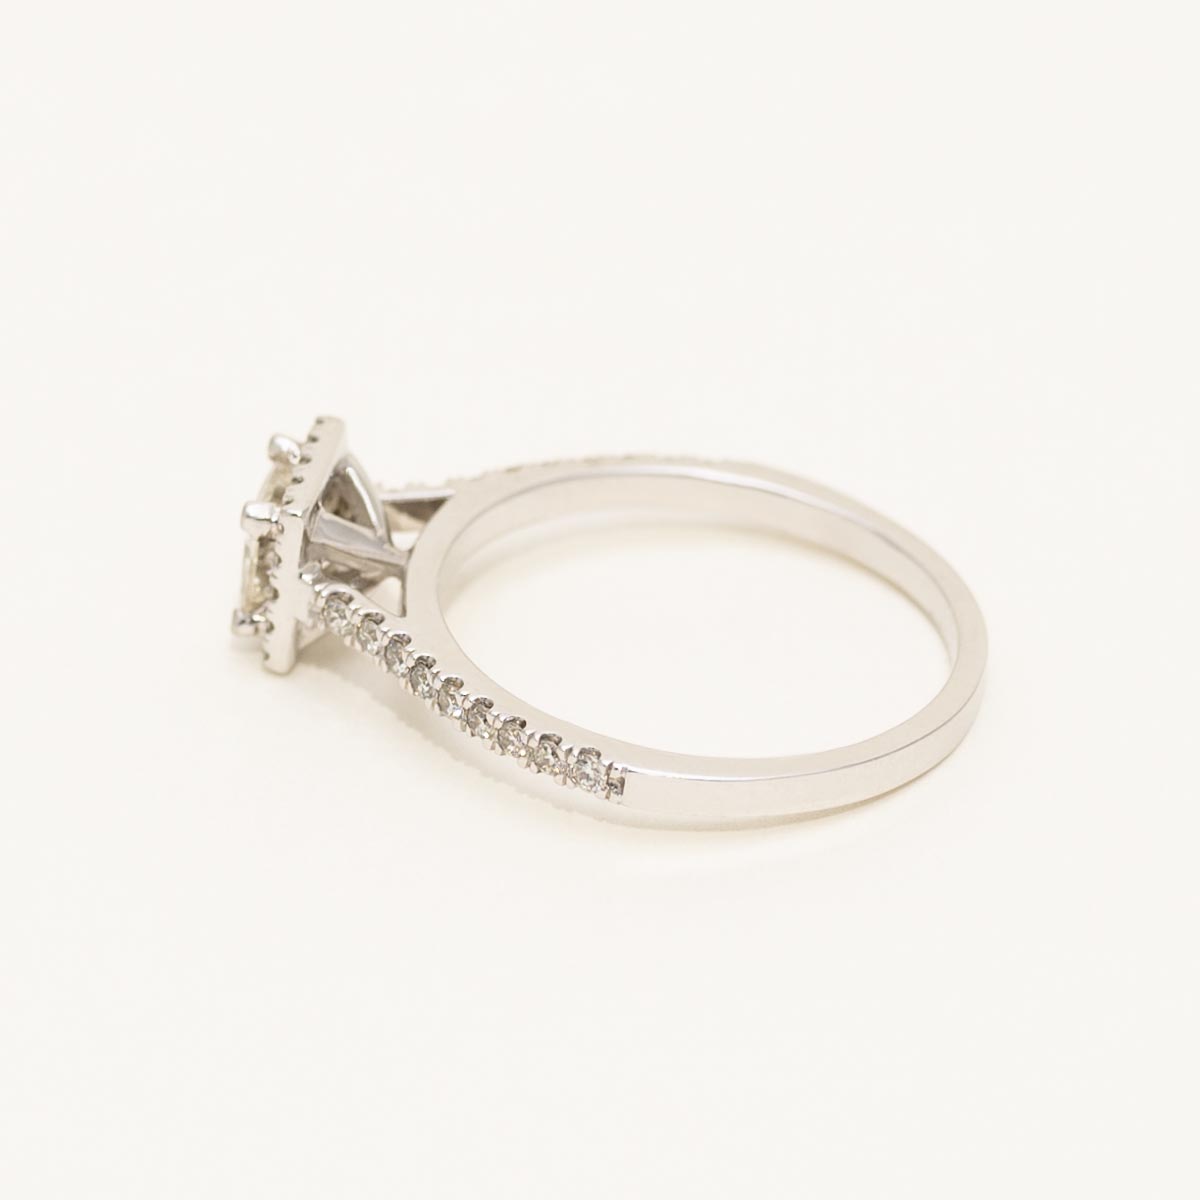 Princess Cut Diamond Halo Engagement Ring in 14kt White Gold (3/4ct tw)